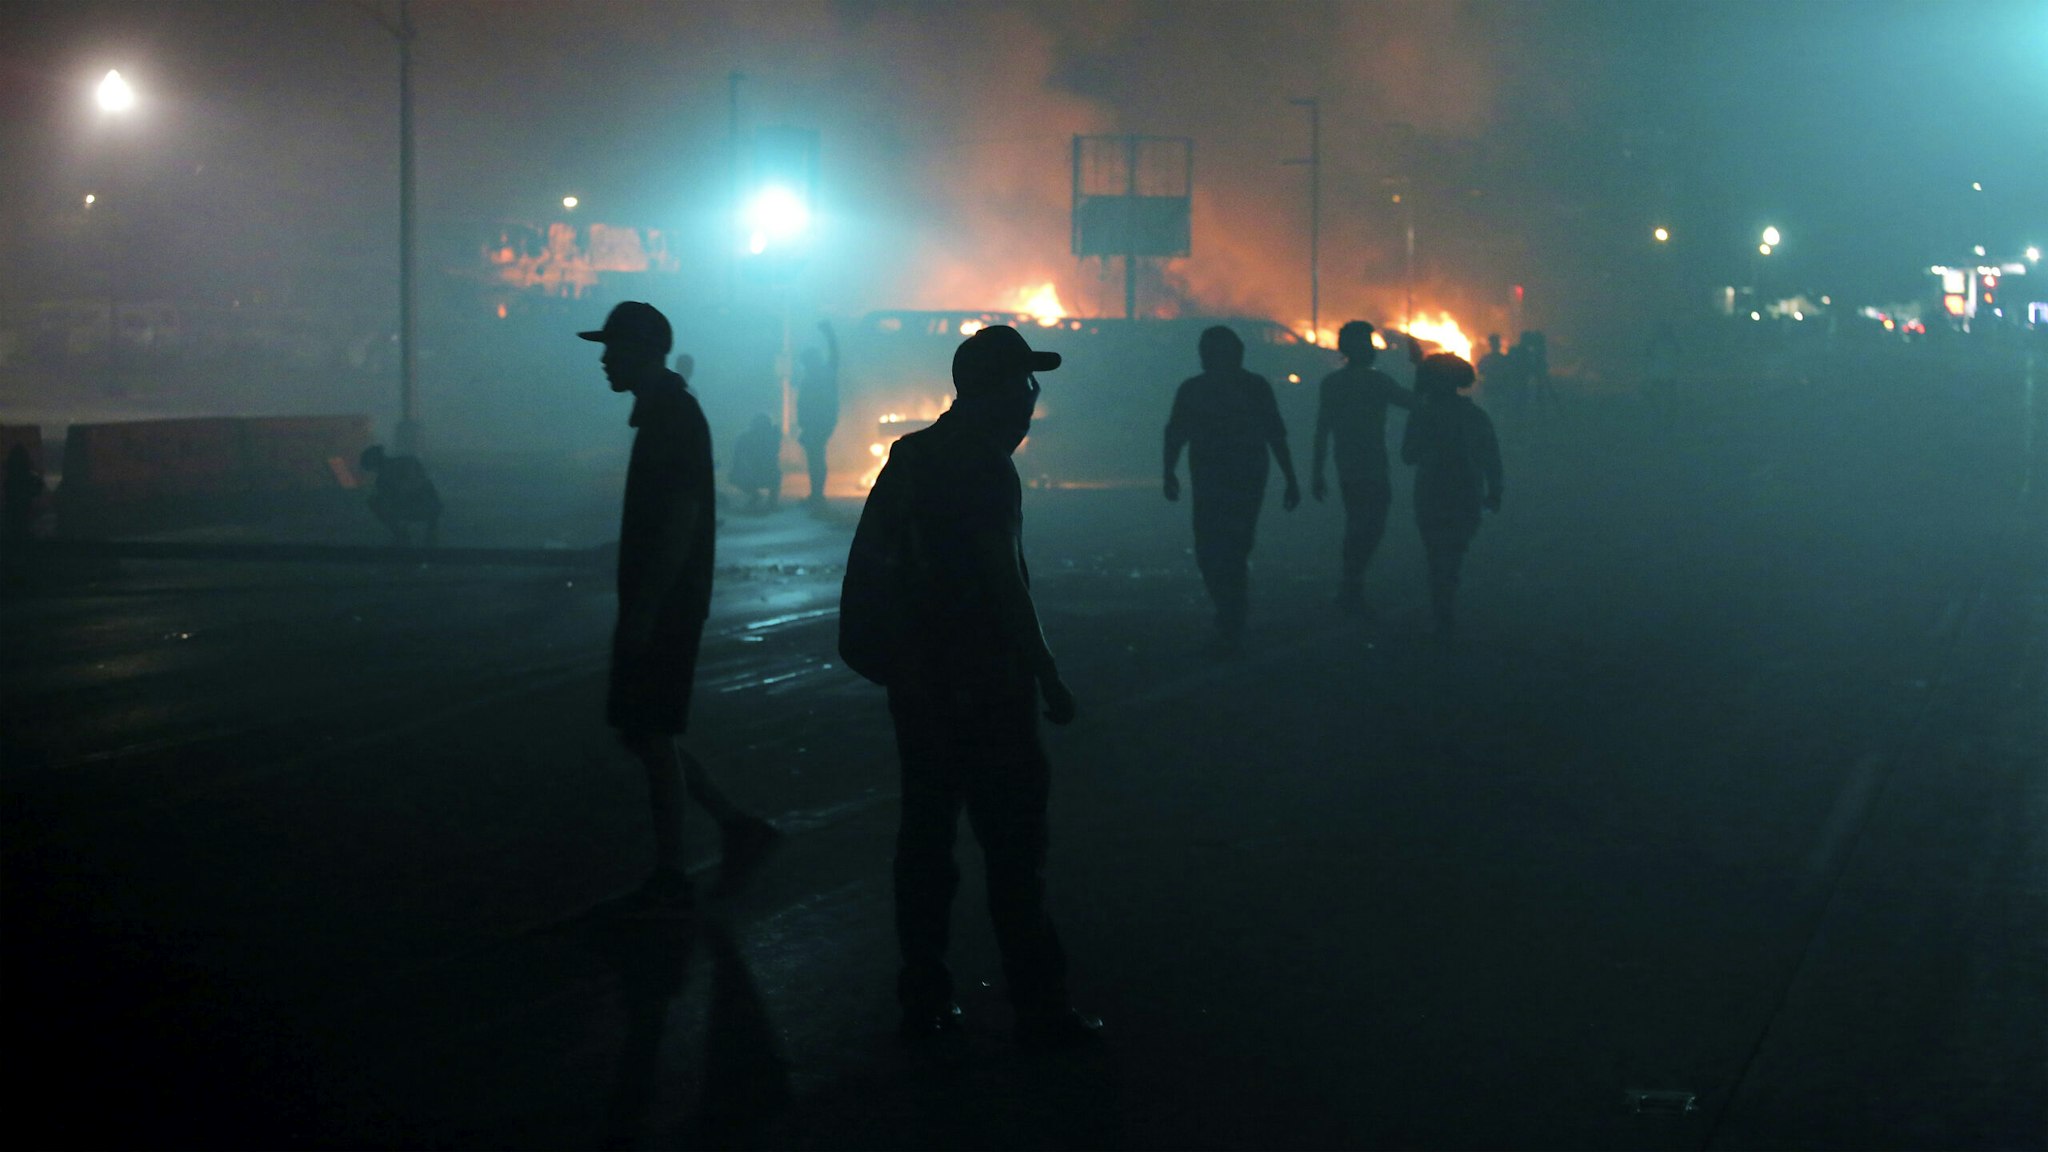 KENOSHA, WI - AUGUST 24: People walk trough smoke filled street from near by burinng buildings as demonstrators protest the police shooting of Jacob Blake on Monday, August 24, 2020 in Kenosha, Wisconsin. Blake was shot in the back multiple times by police officers responding to a domestic dispute call yesterday.